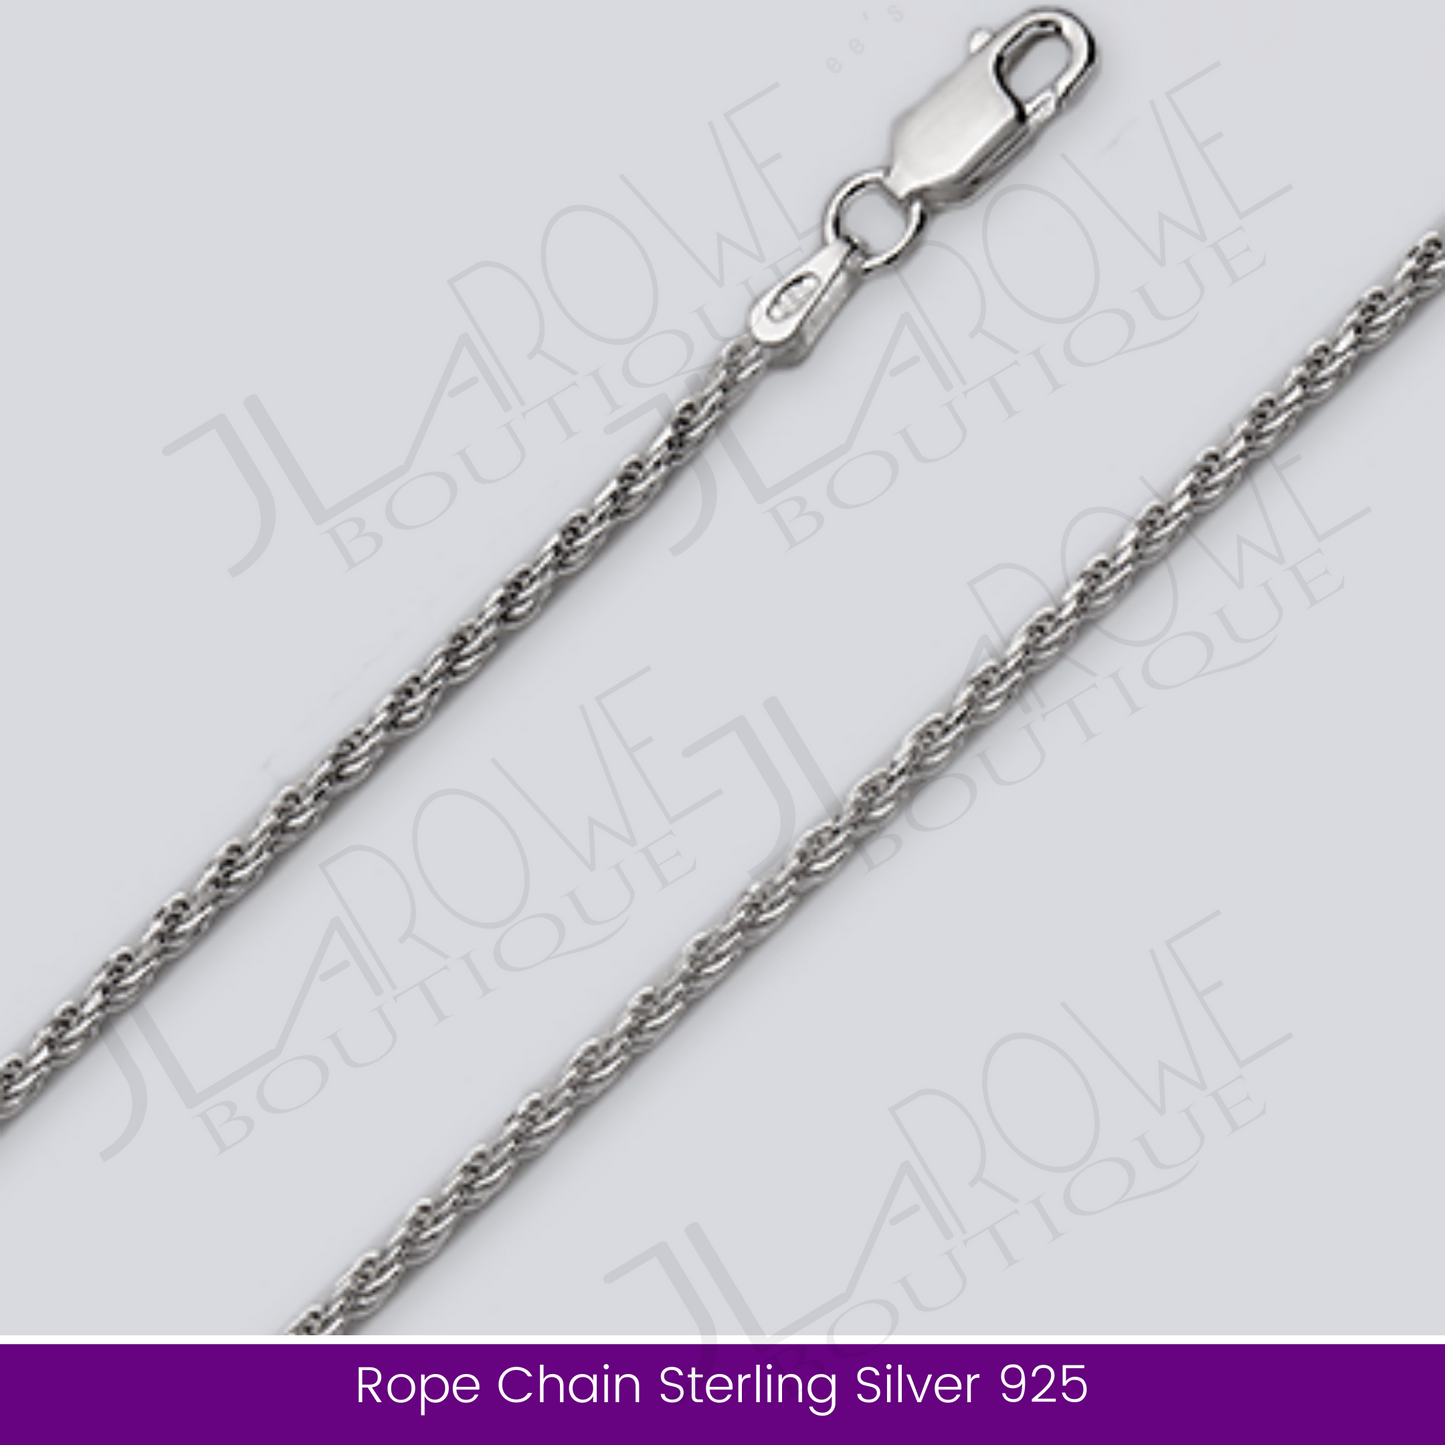 Rope Chain Sterling Silver 925 (Limited Stock)